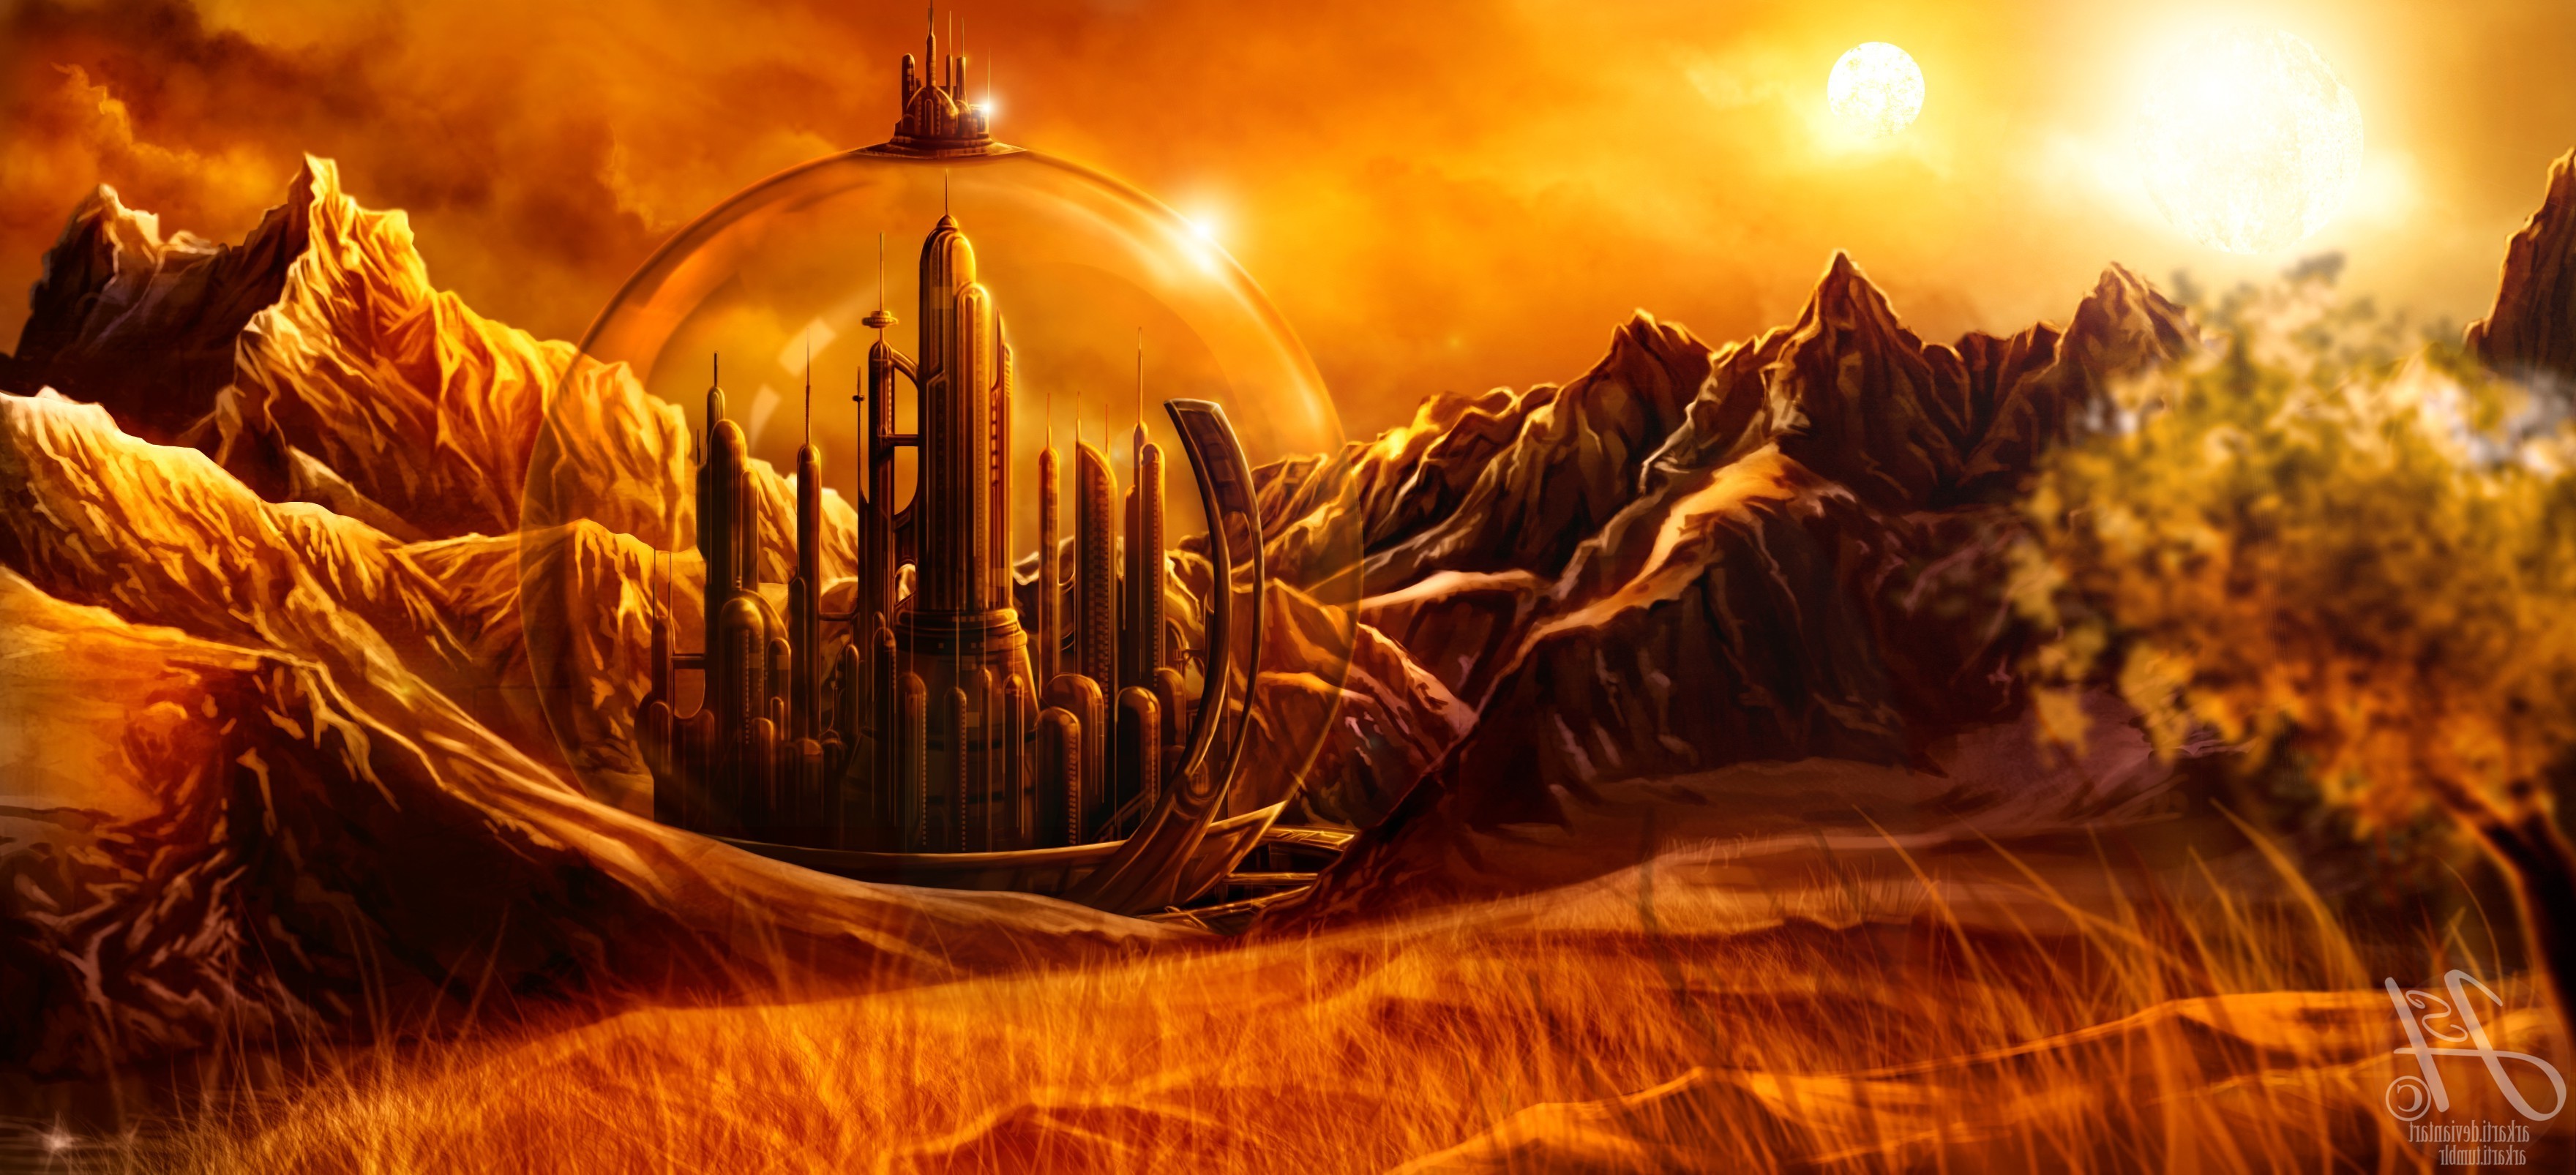 Doctor Who, The Doctor, Gallifrey Wallpapers HD / Desktop and Mobile Backgrounds